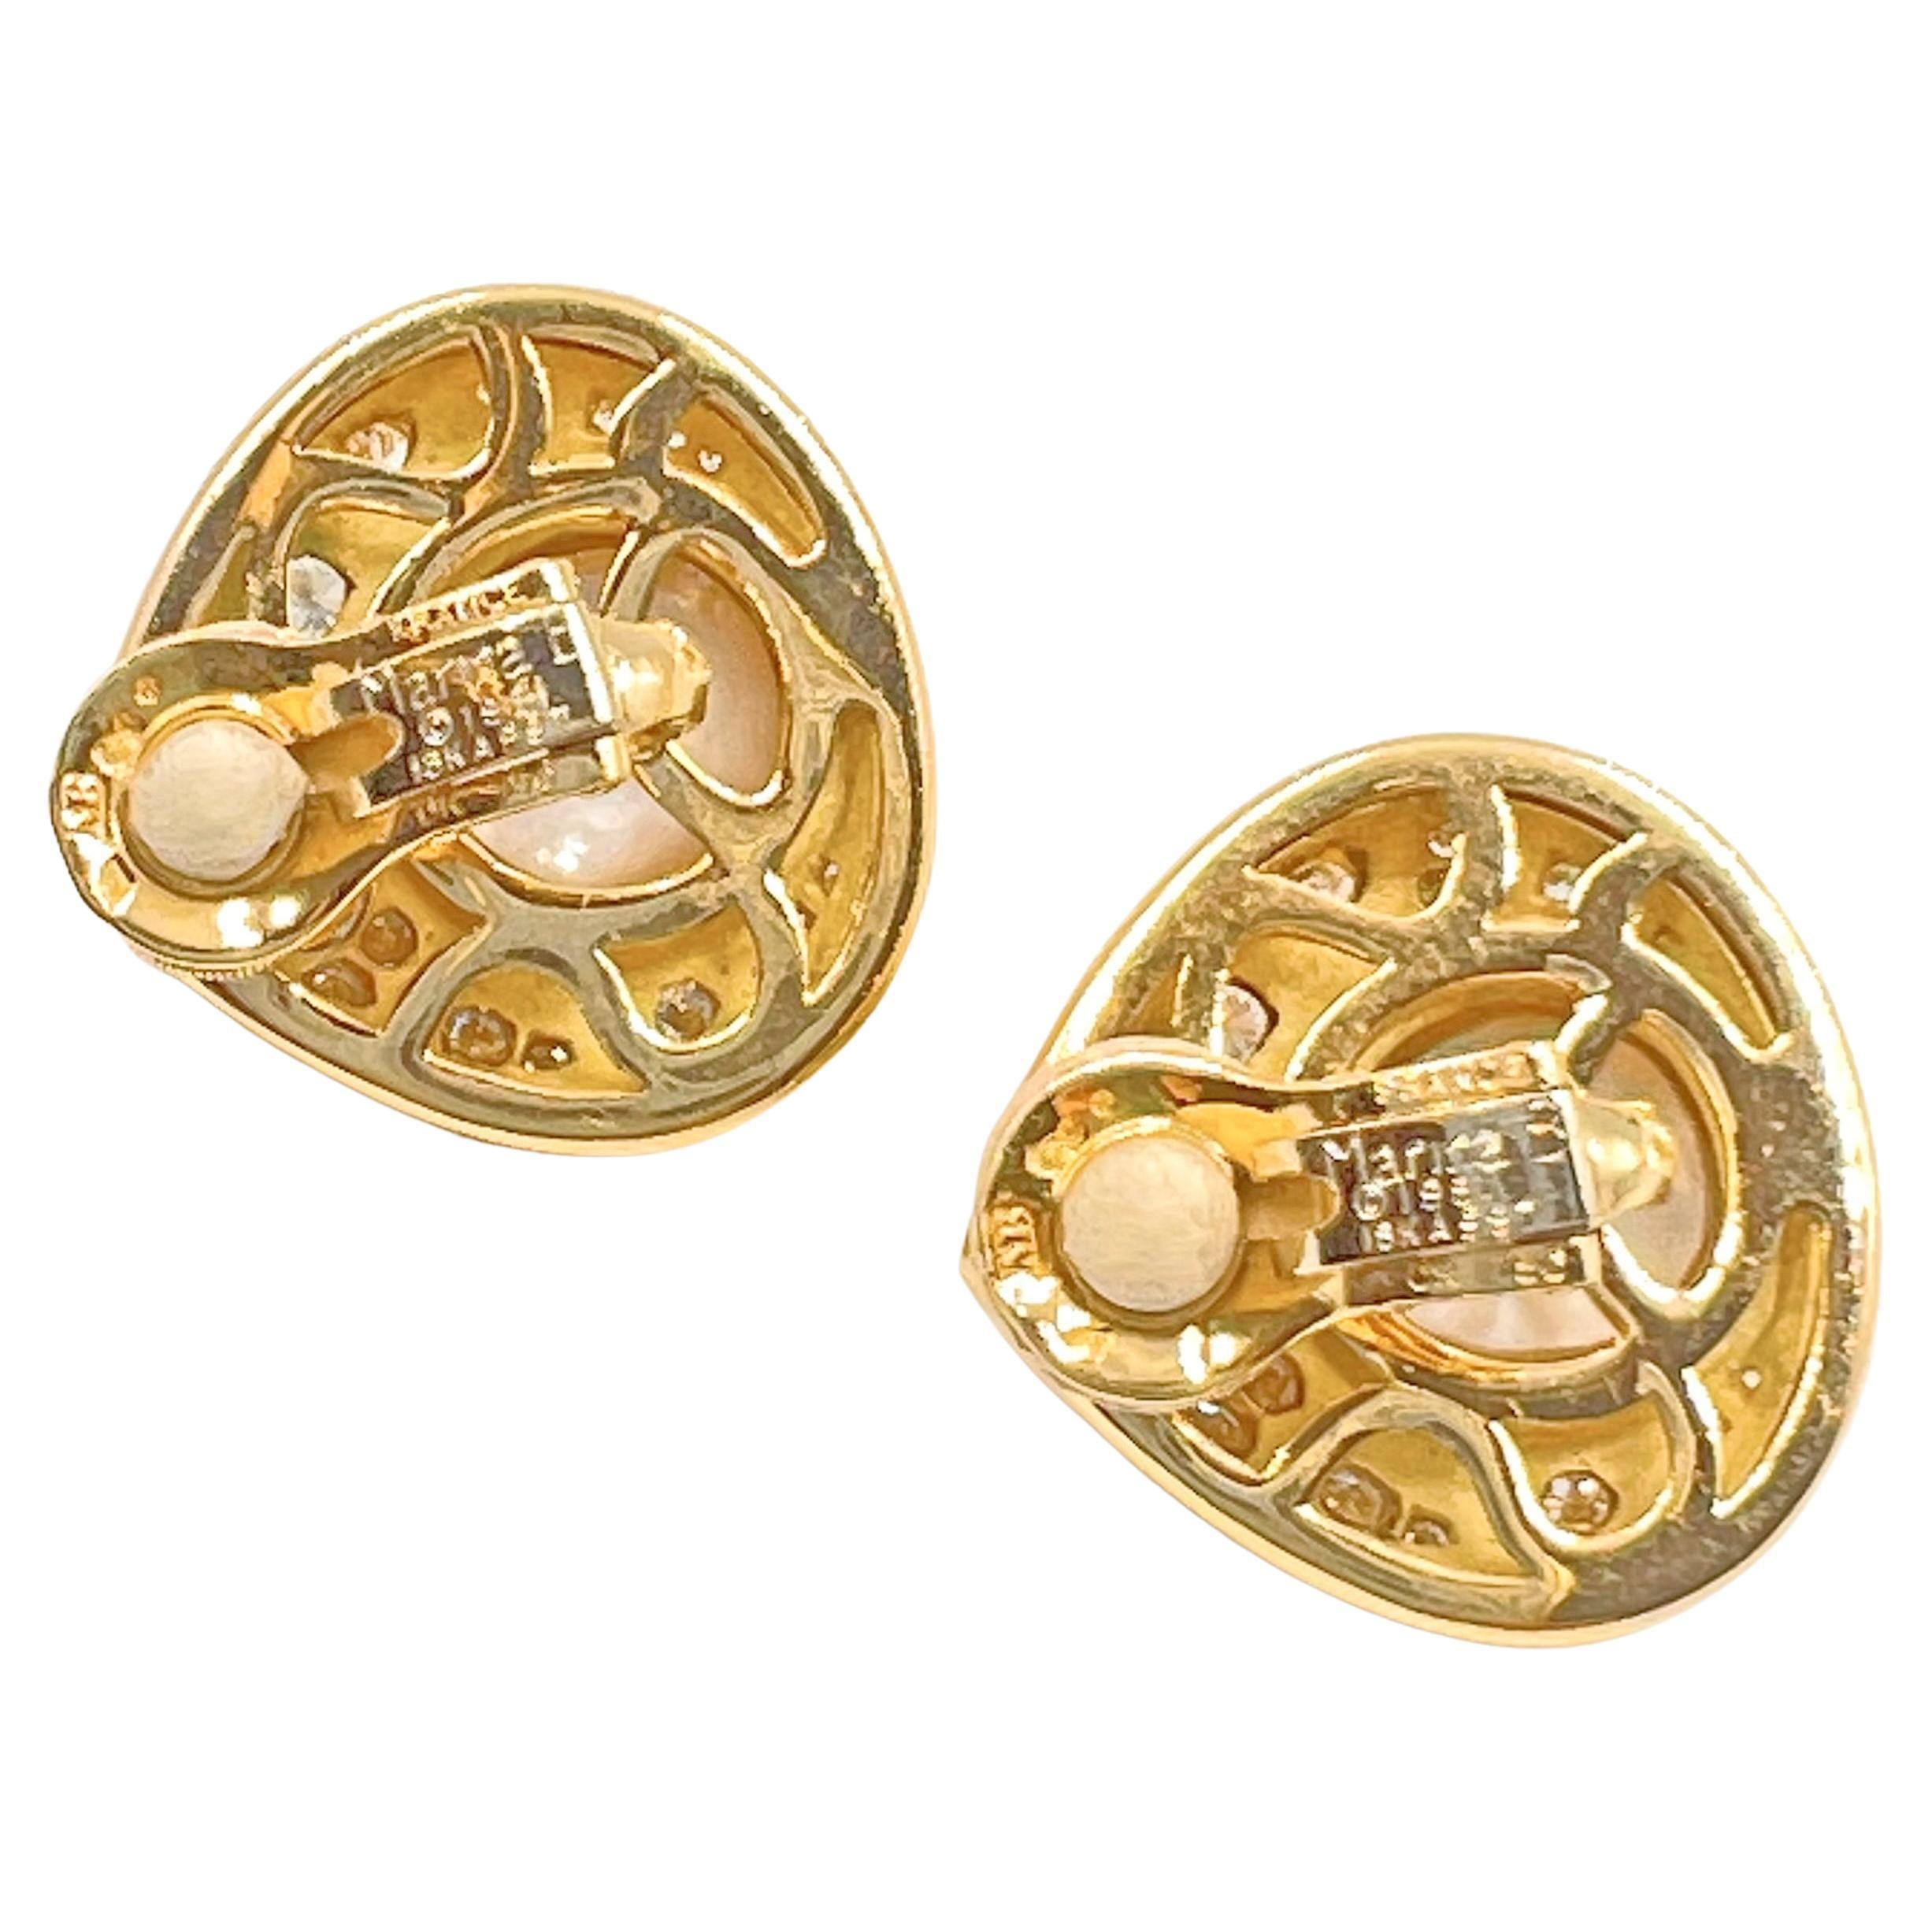 Pear-shaped polished 18k yellow gold earrings by Marina B.  Bezel-set with two larger mabe pearls measuring 12.5mm in diameter and each having a mother-of-pearl pear-shaped cabochon measuring 5 x 6mm at top.  Twenty-eight round brilliant-cut diamond